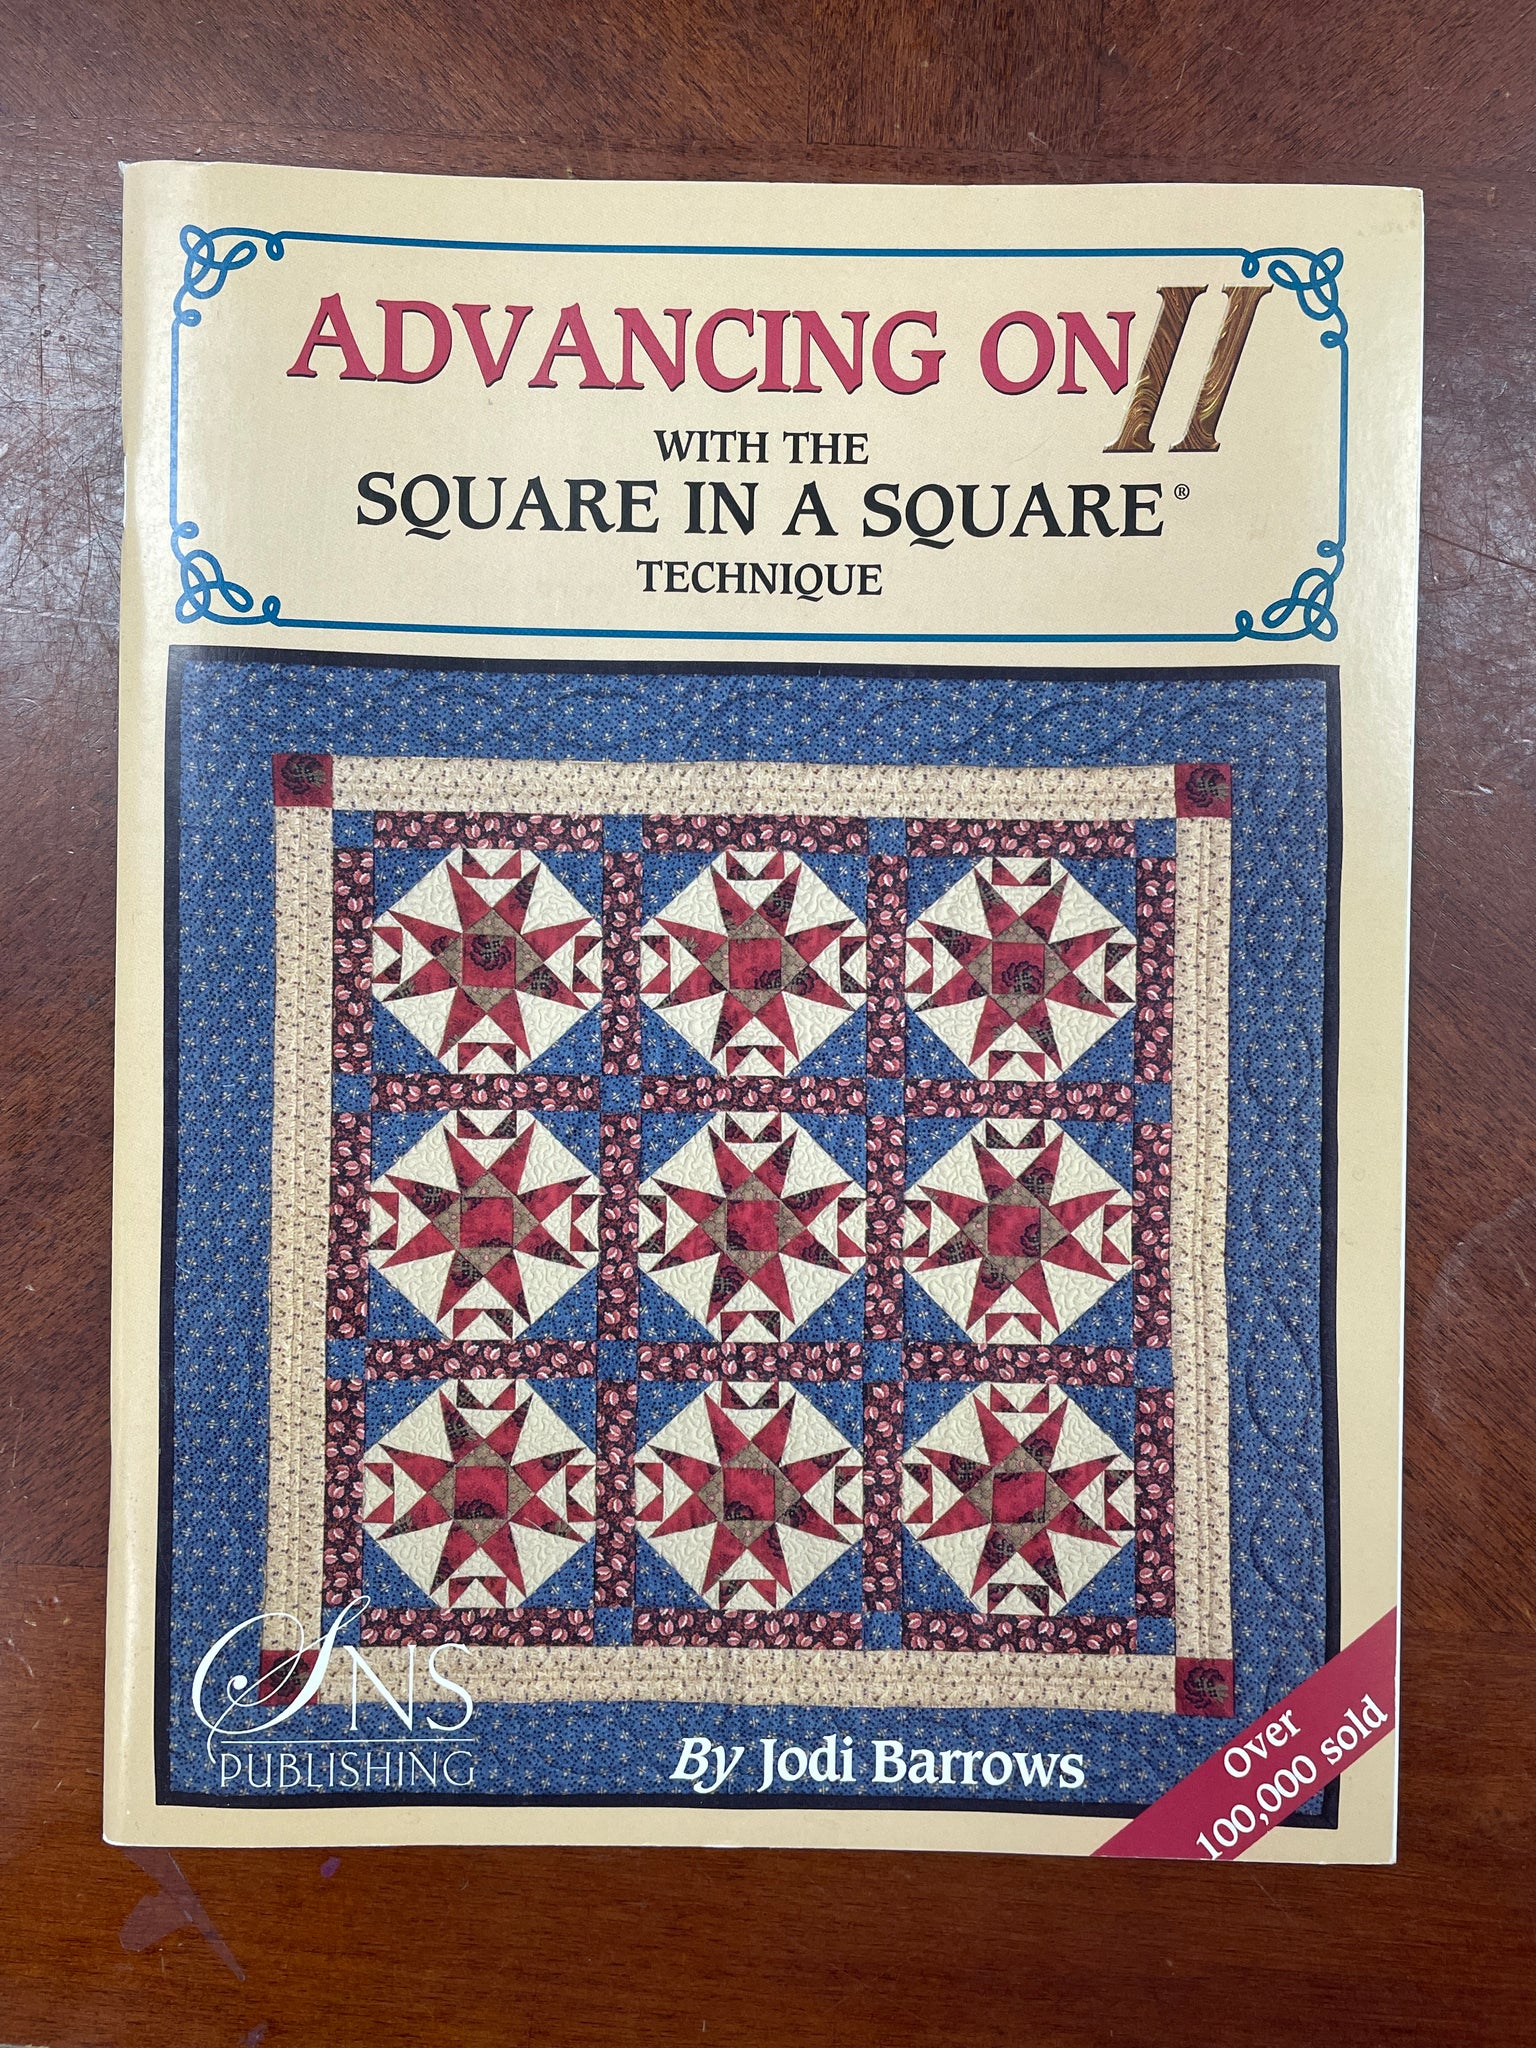 2002 Quilting Book - "Advancing on II"